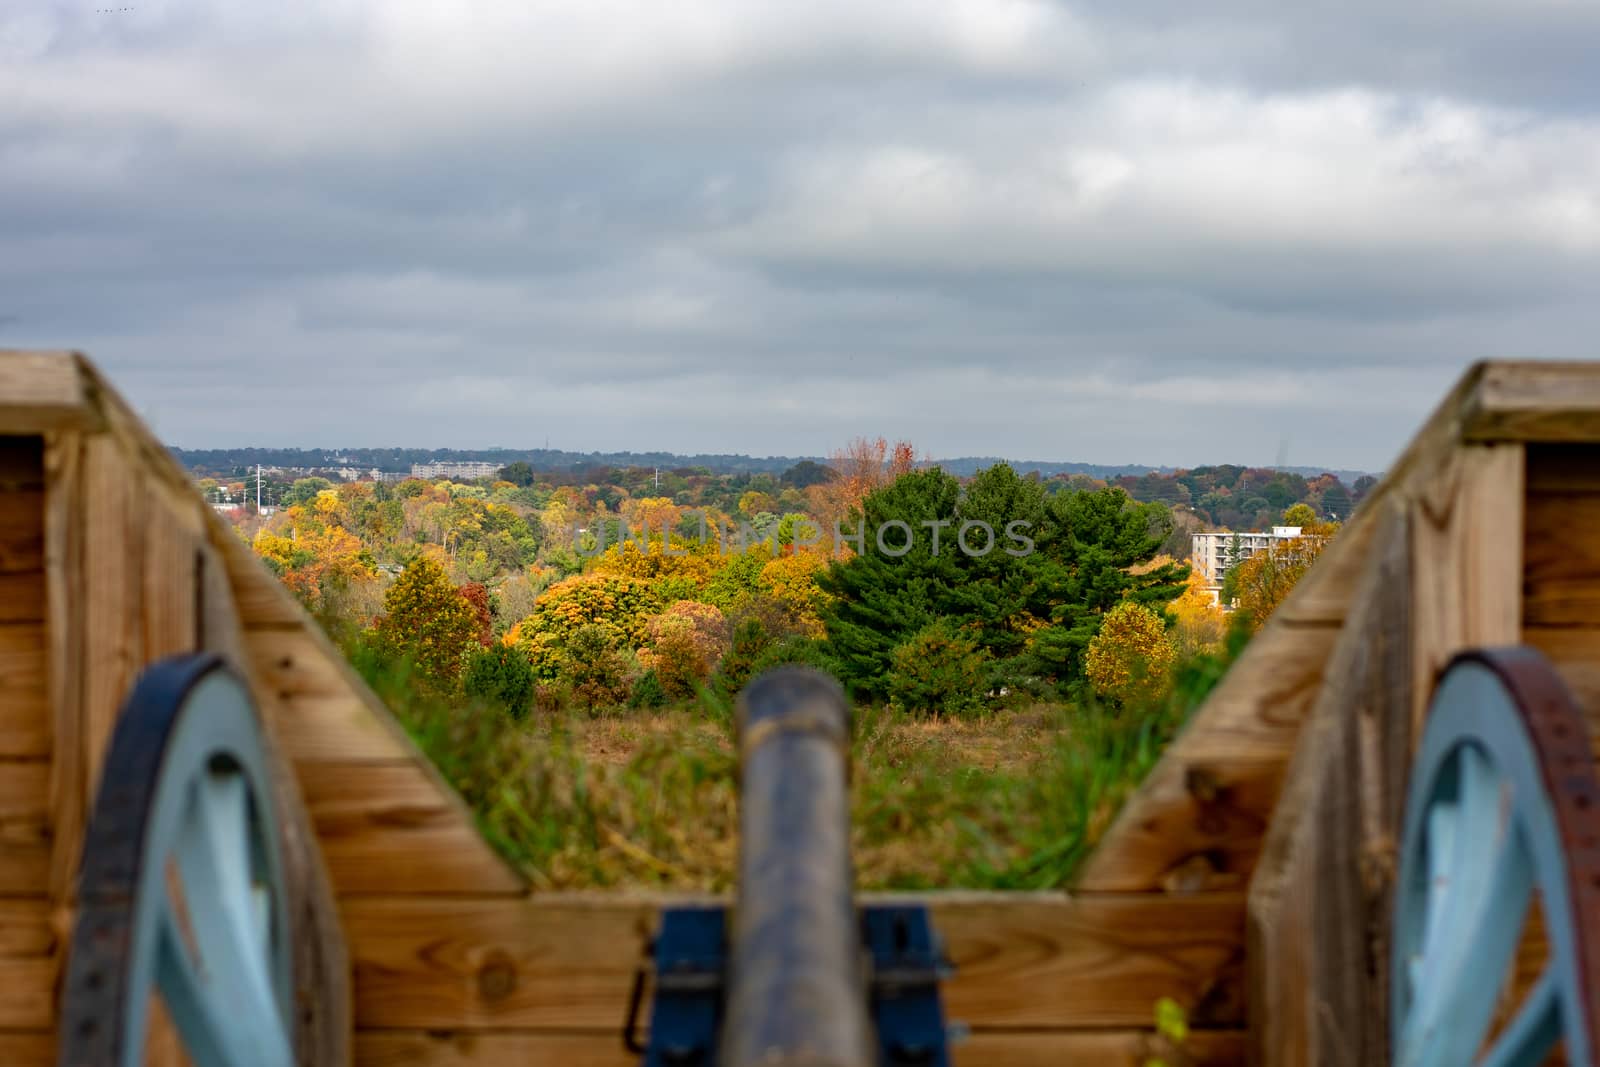 The Top of Autumn Trees Over a Cannon at Valley Forge National   by bju12290